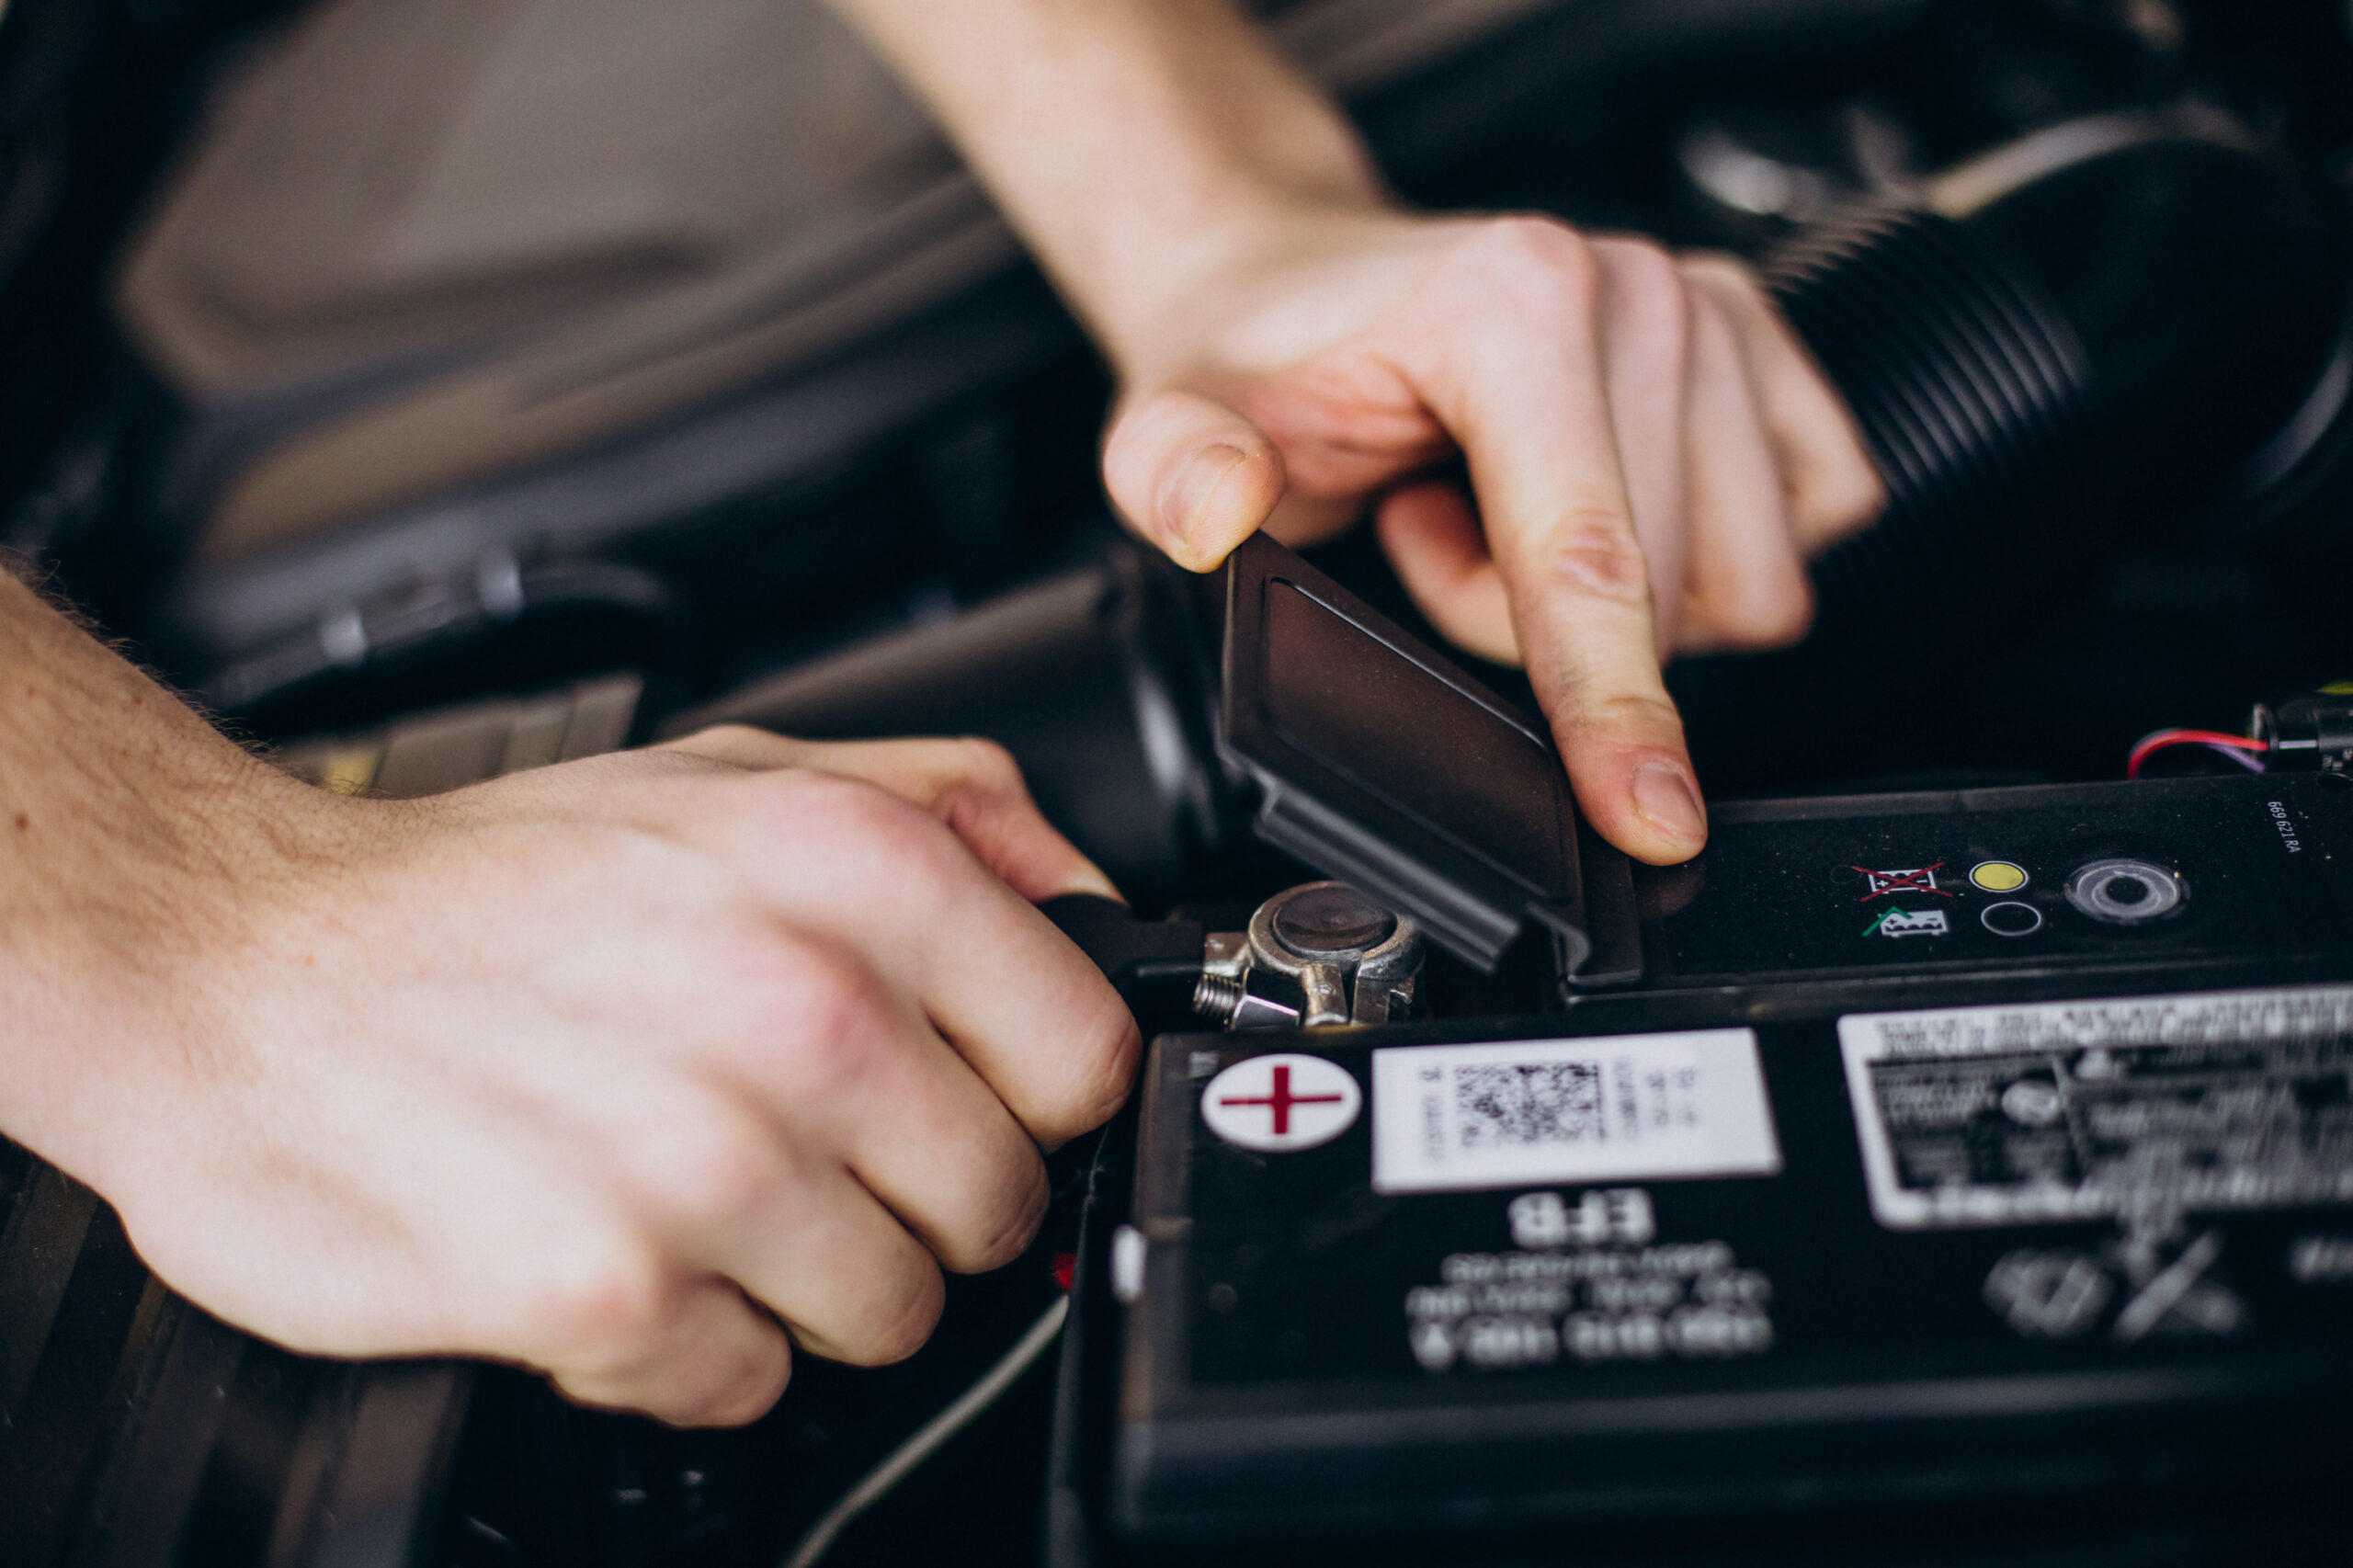 car battery performance, checking car battery, battery maintenance, assessing battery health, car battery inspection, car battery tips, battery maintenance schedule, car battery load test, car battery voltage check,Illustration of a Car Battery Maintenance Checklist